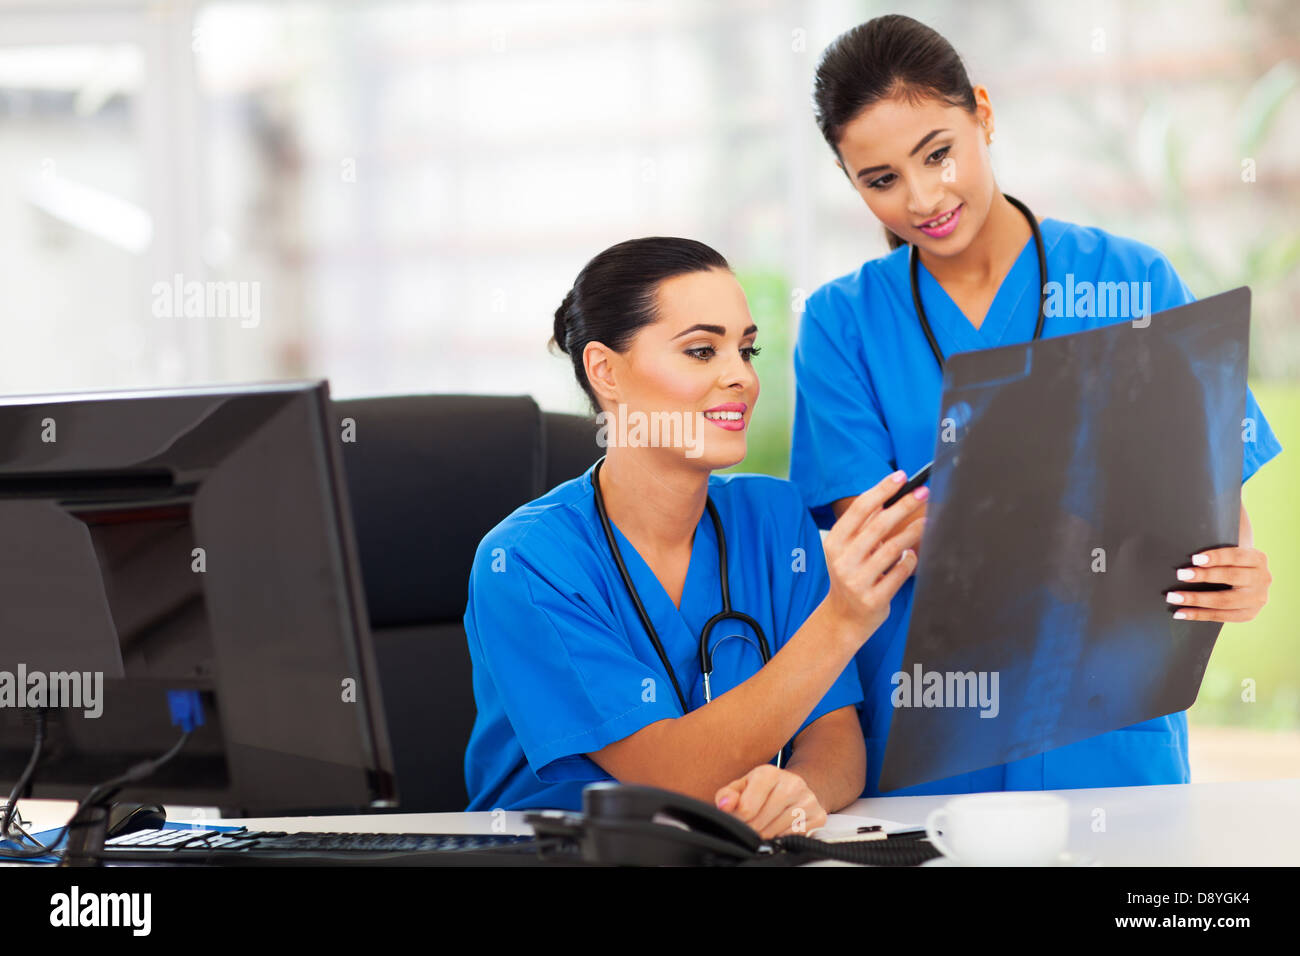 beautiful woman medical workers studying x-ray Stock Photo